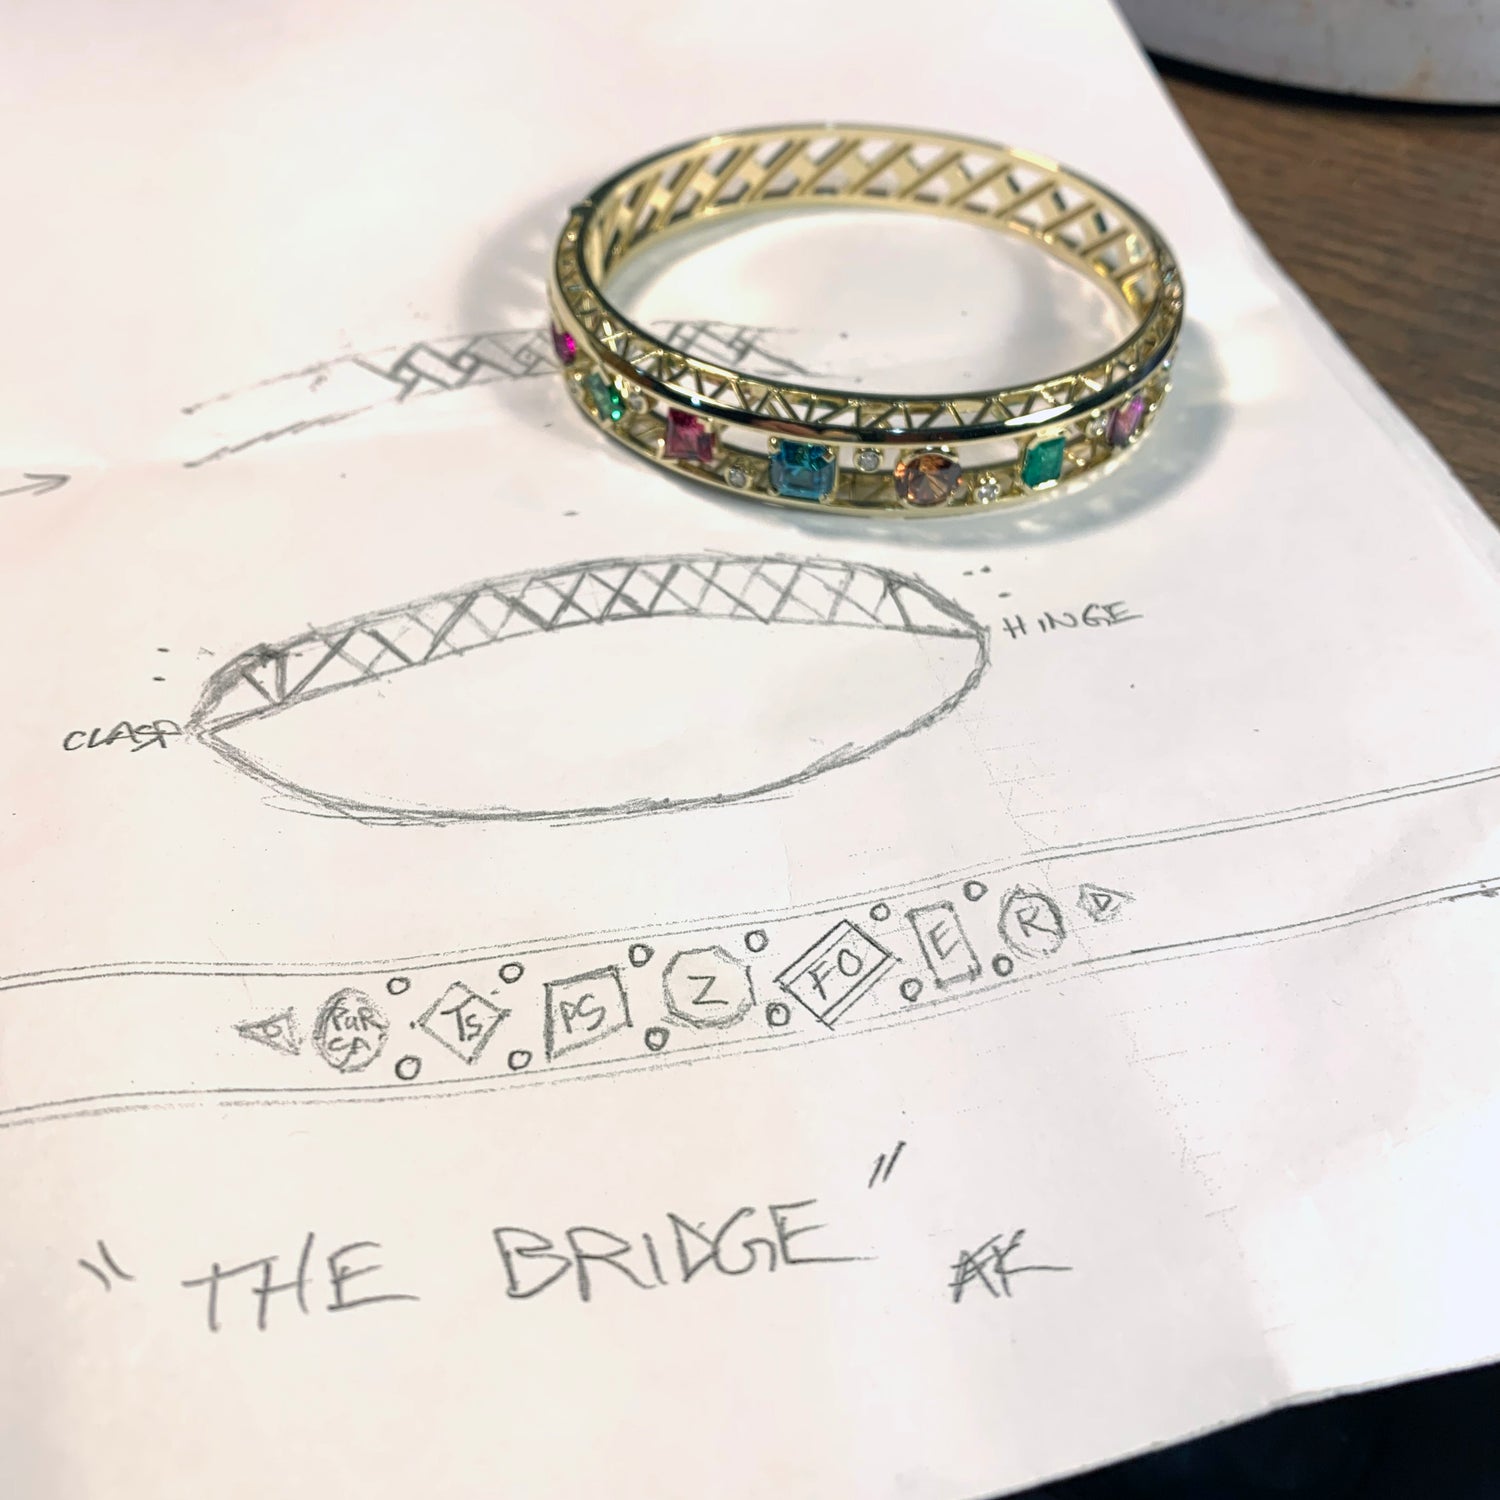 several sketches on a piece of paper with a bracelet design are shown with the finished design sitting on top of the paper.  The 18k yellow gold bracelet is filled with brightly colored gemstones and diamonds and is titled "the bridge" 